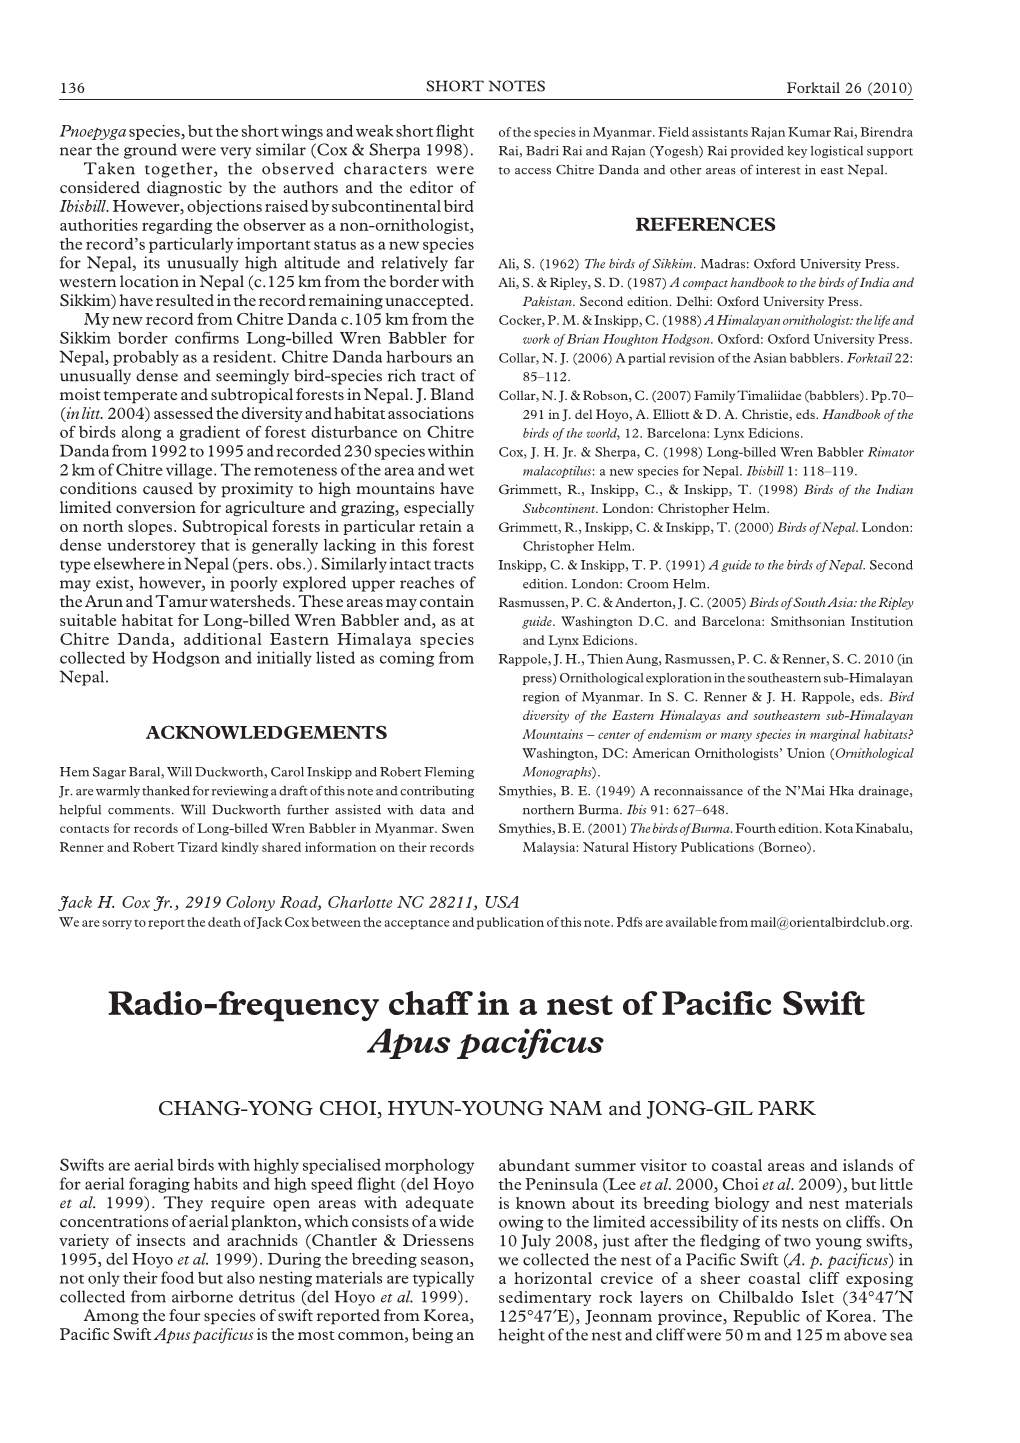 Radio-Frequency Chaff in a Nest of Pacific Swift Apus Pacificus (PDF